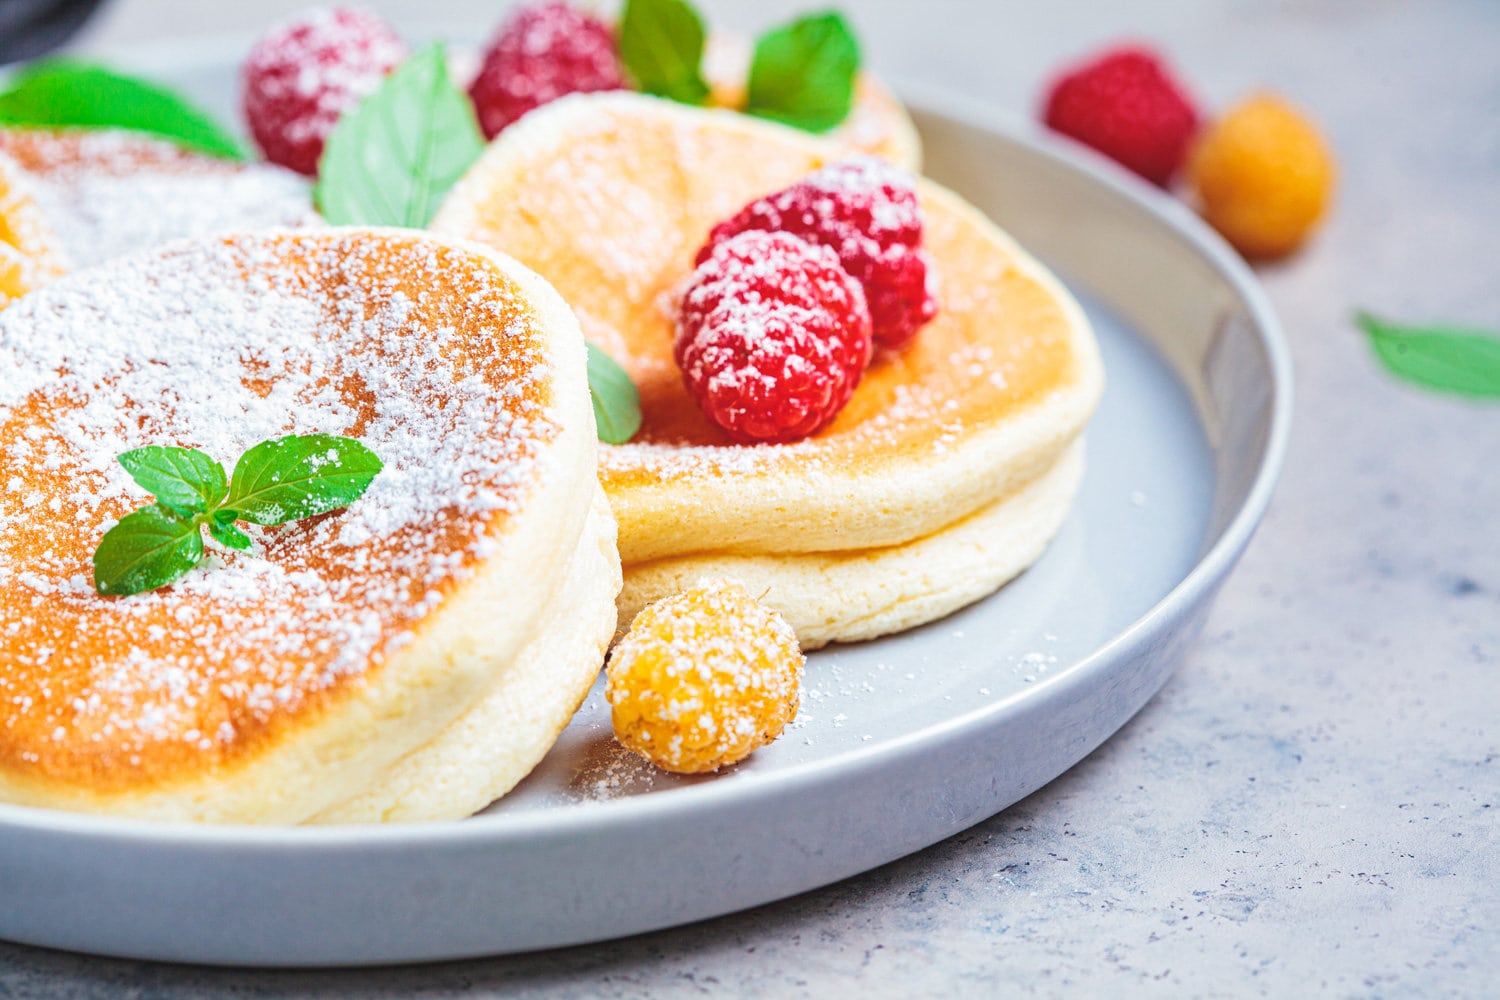 Japanese fluffy pancakes with raspberries in gray plate, gray background. Japanese cuisine